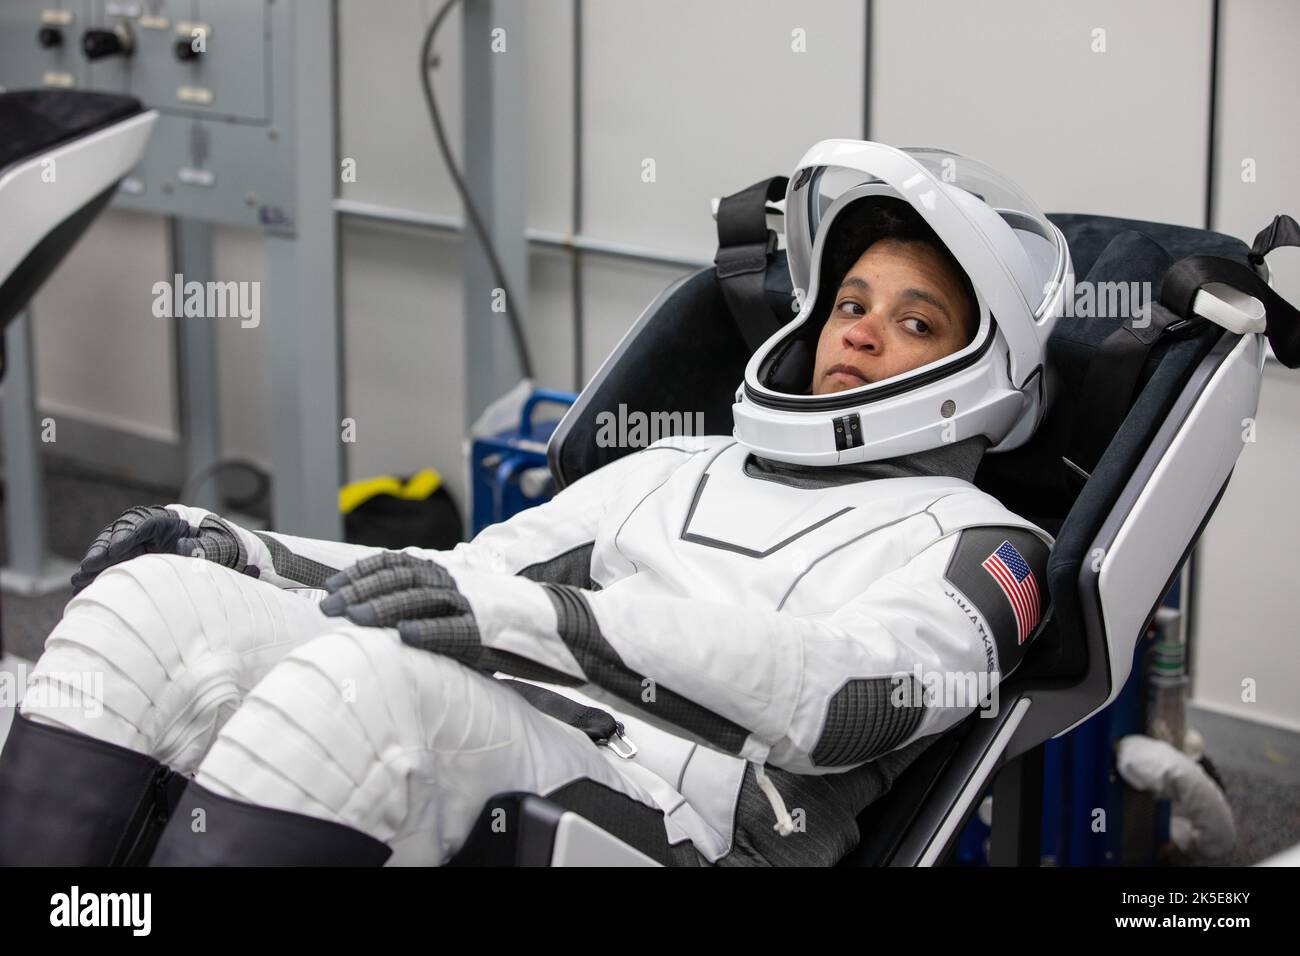 Crew-4 mission astronaut Jessica Watkins relaxes in the suit room in the Astronaut Crew Quarters inside Kennedy Space Center’s Neil A. Armstrong Operations and Checkout Building on April 27, 2022. A team of SpaceX suit technicians assisted the crew as they put on their custom-fitted spacesuits and checked the suits for leaks. Watkins, along with Bob Hines, Kjell Lindgren, and Samantha Cristoforetti, will launch aboard SpaceX’s Crew Dragon, powered by the company’s Falcon 9 rocket, to the International Space Station as part of NASA’s Commercial Crew Program. Crew-4 is scheduled to lift off toda Stock Photo